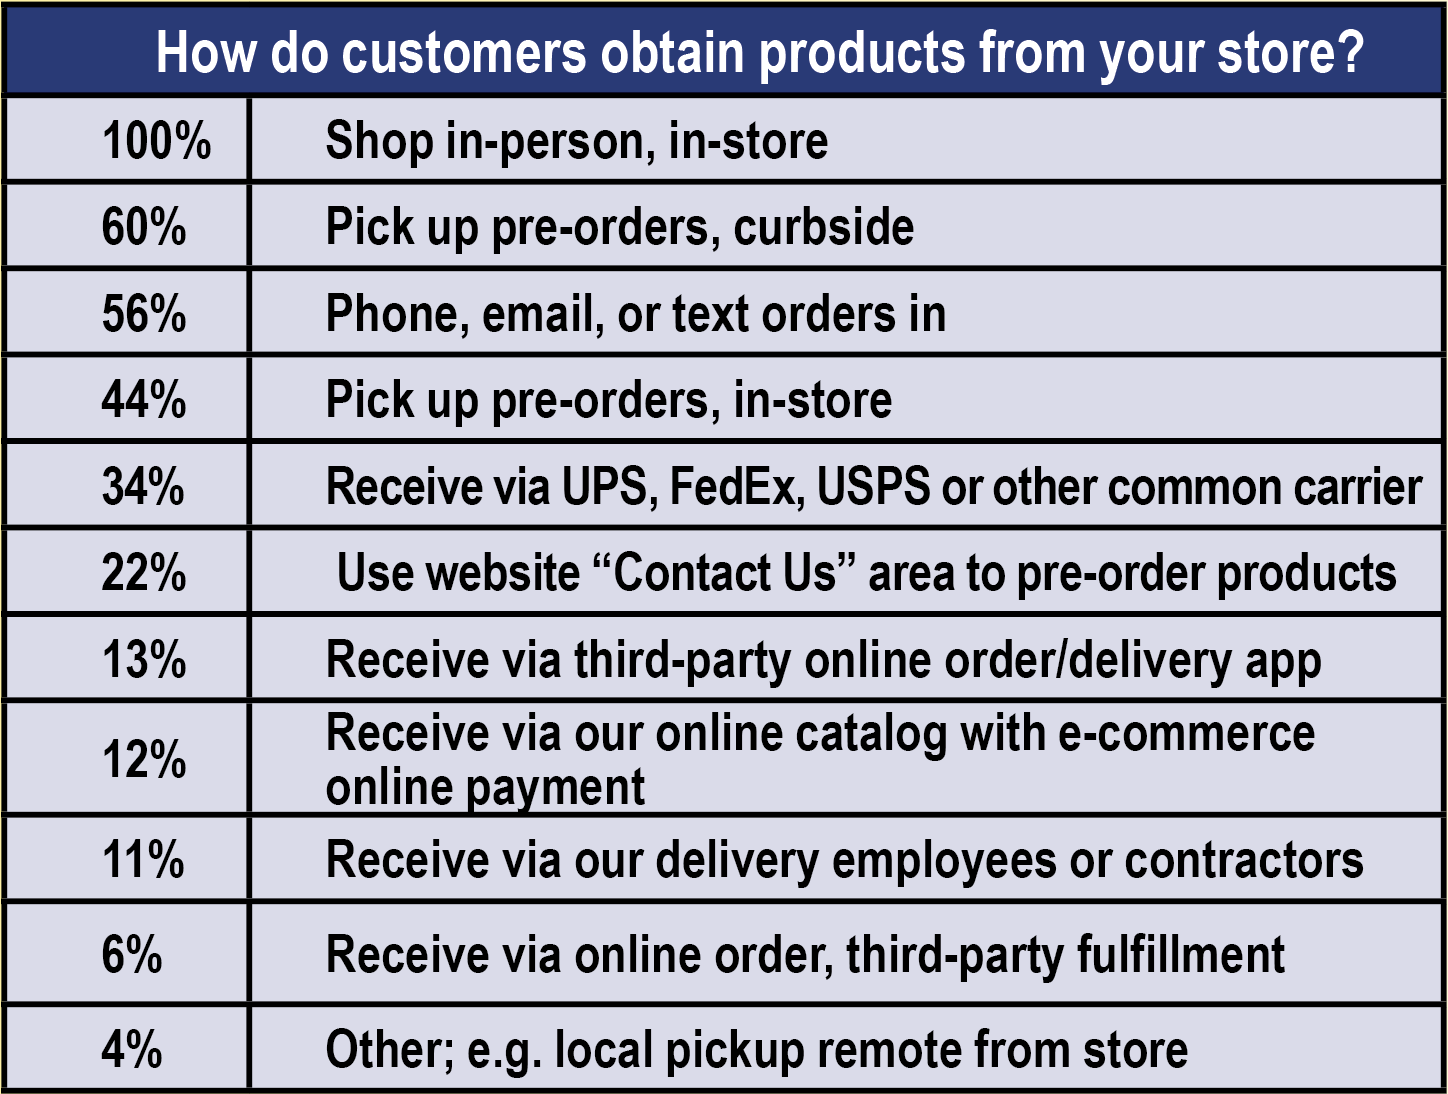 Image ID: A chart titled "How do customers obtain products from your store?" The column on the right displays different options for obtaining products, while the column on the left displays the percentage of stores that offer the option. In order, those statistics are: 100% Shop in-person, in-store; 60% Pick up pre-orders, curbside; 56% Phone, email, or text orders in; 44% Pick up pre-orders, in-store; 34% Receive via UPS, FedEx, USPS or other common carrier; 22% Use website 'Contact Us' area to pre-order products; 13% Receive via third-party online order/delivery app; 12% Receive via our online catalog with e-commerce online payment; 11% Receive via our delivery employees or contractors; 6% Receive via online order, third-party fulfillment; 4% Other, e.g. local pickup remote from store. End ID.